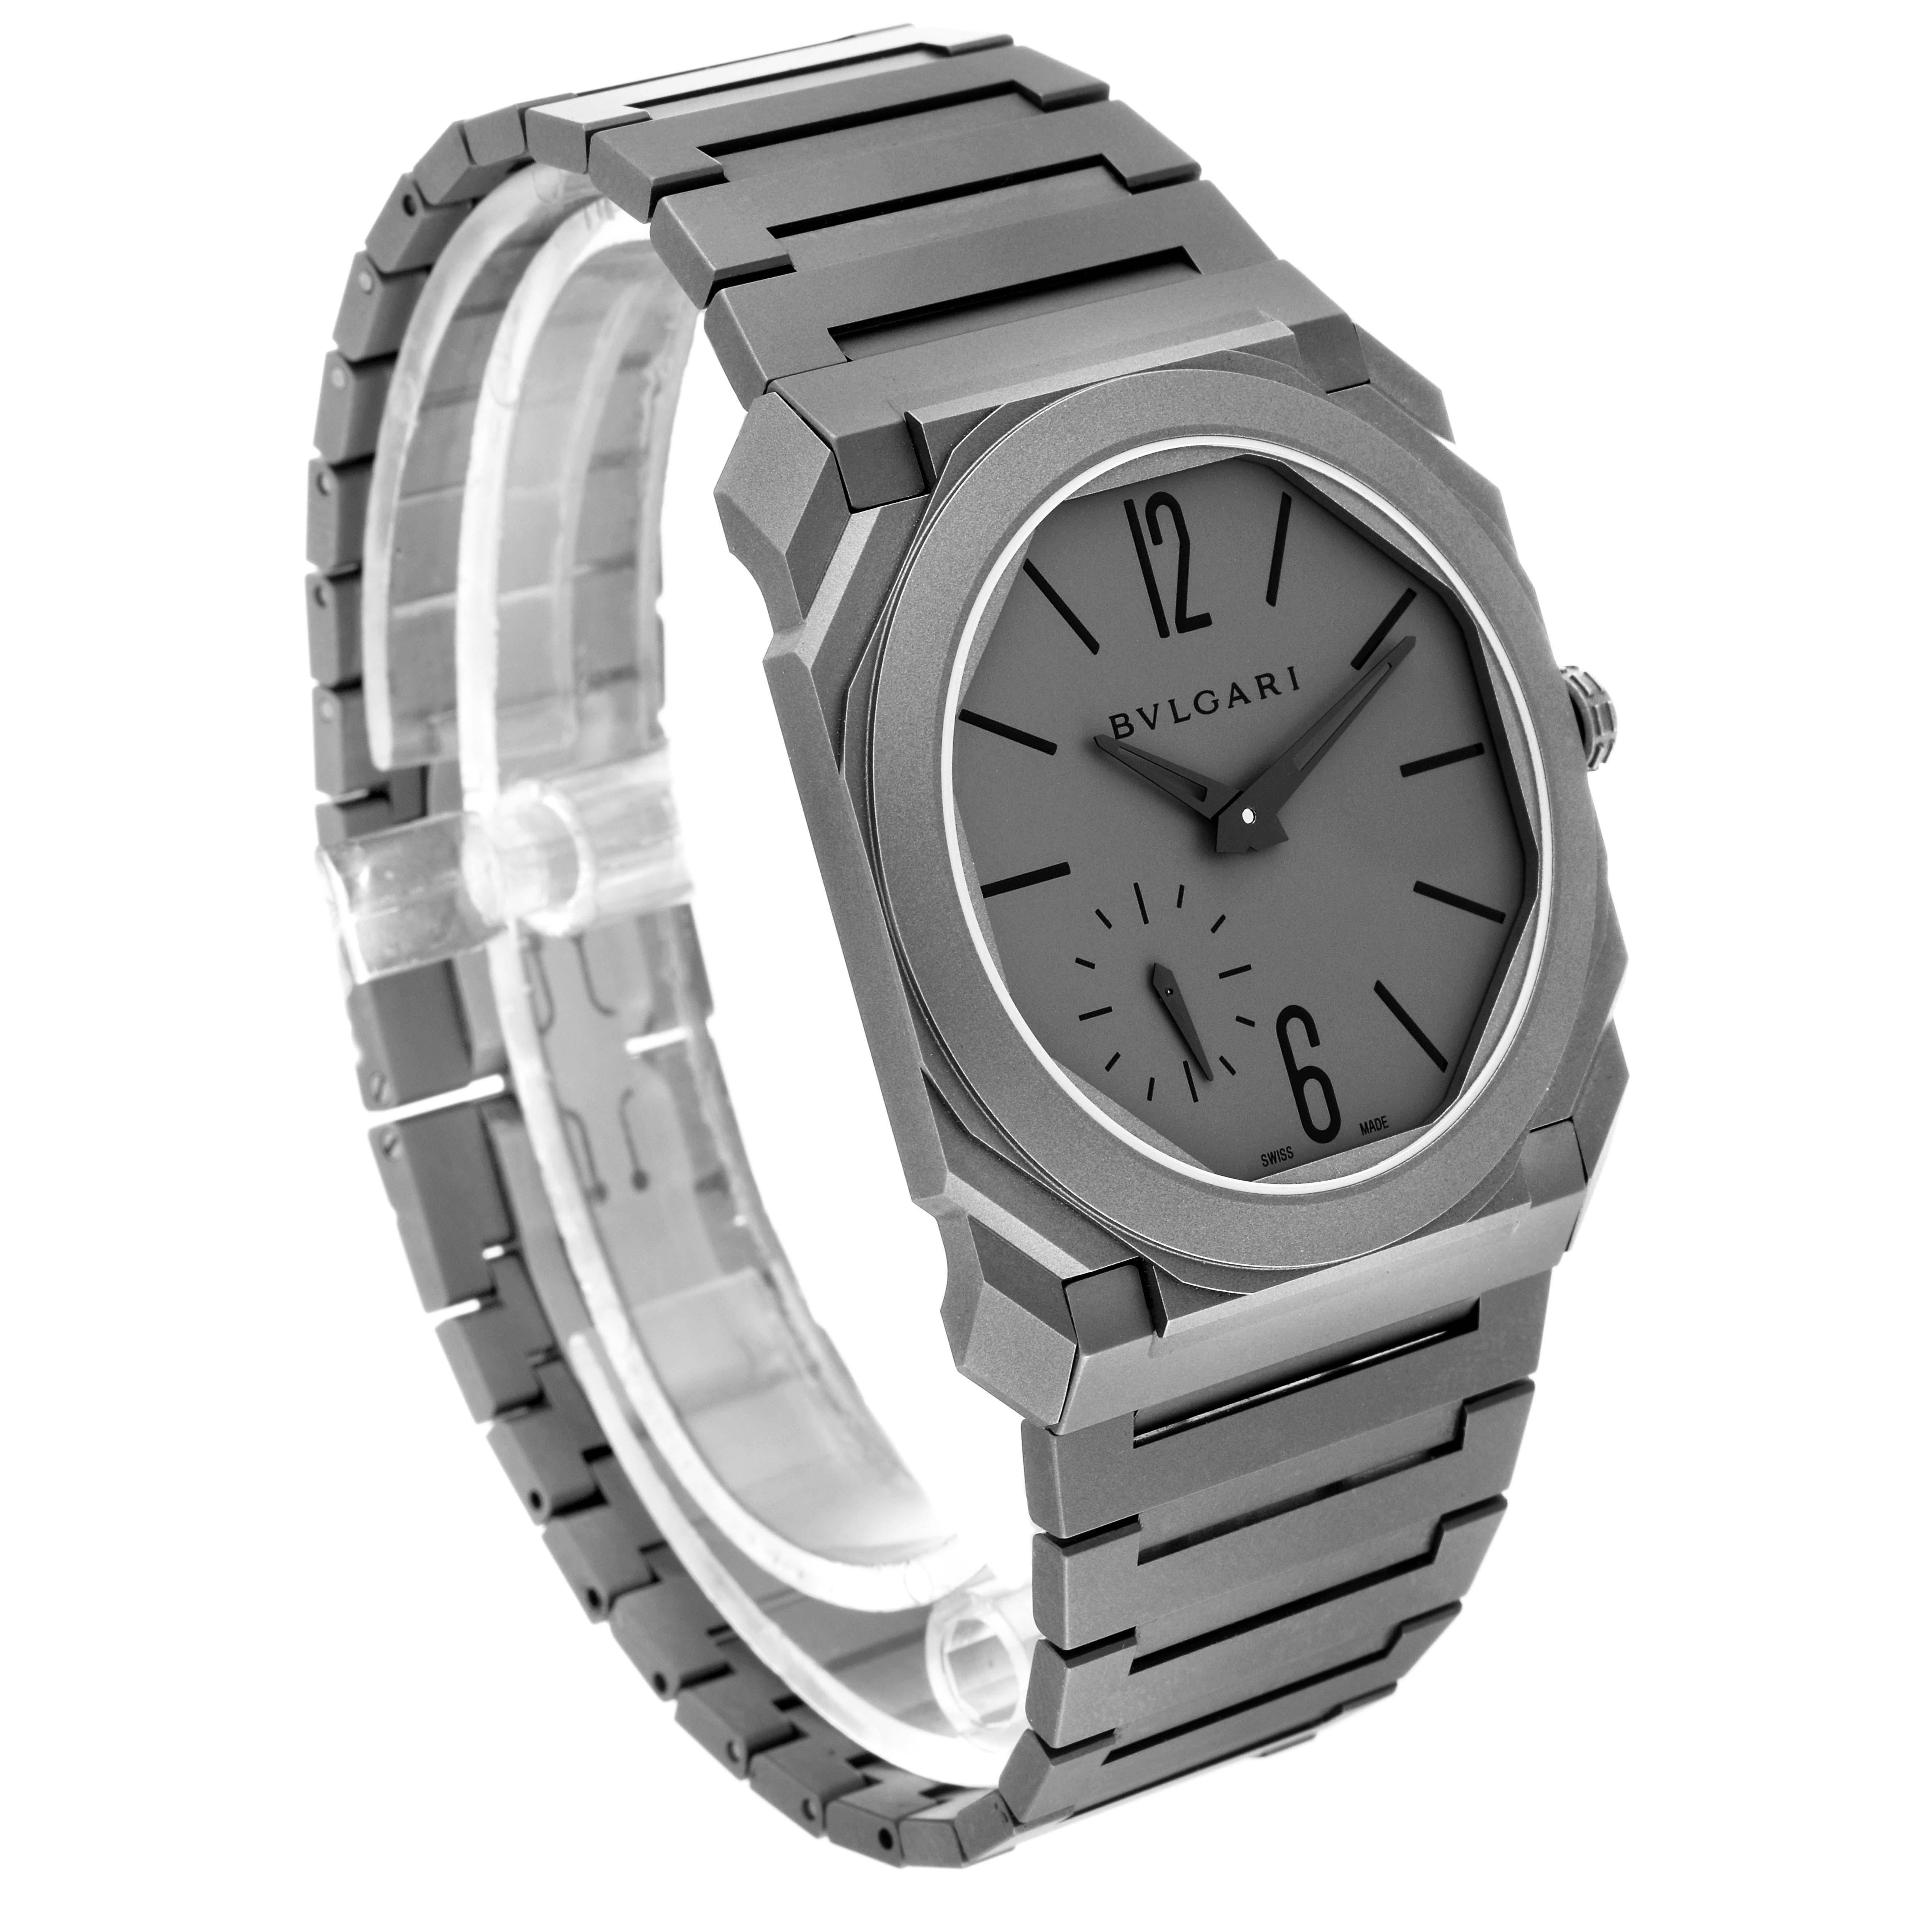 Bvlgari Octo Finissimo Titanium Ultra Thin Mens Watch 102713 Box Papers In Excellent Condition For Sale In Atlanta, GA